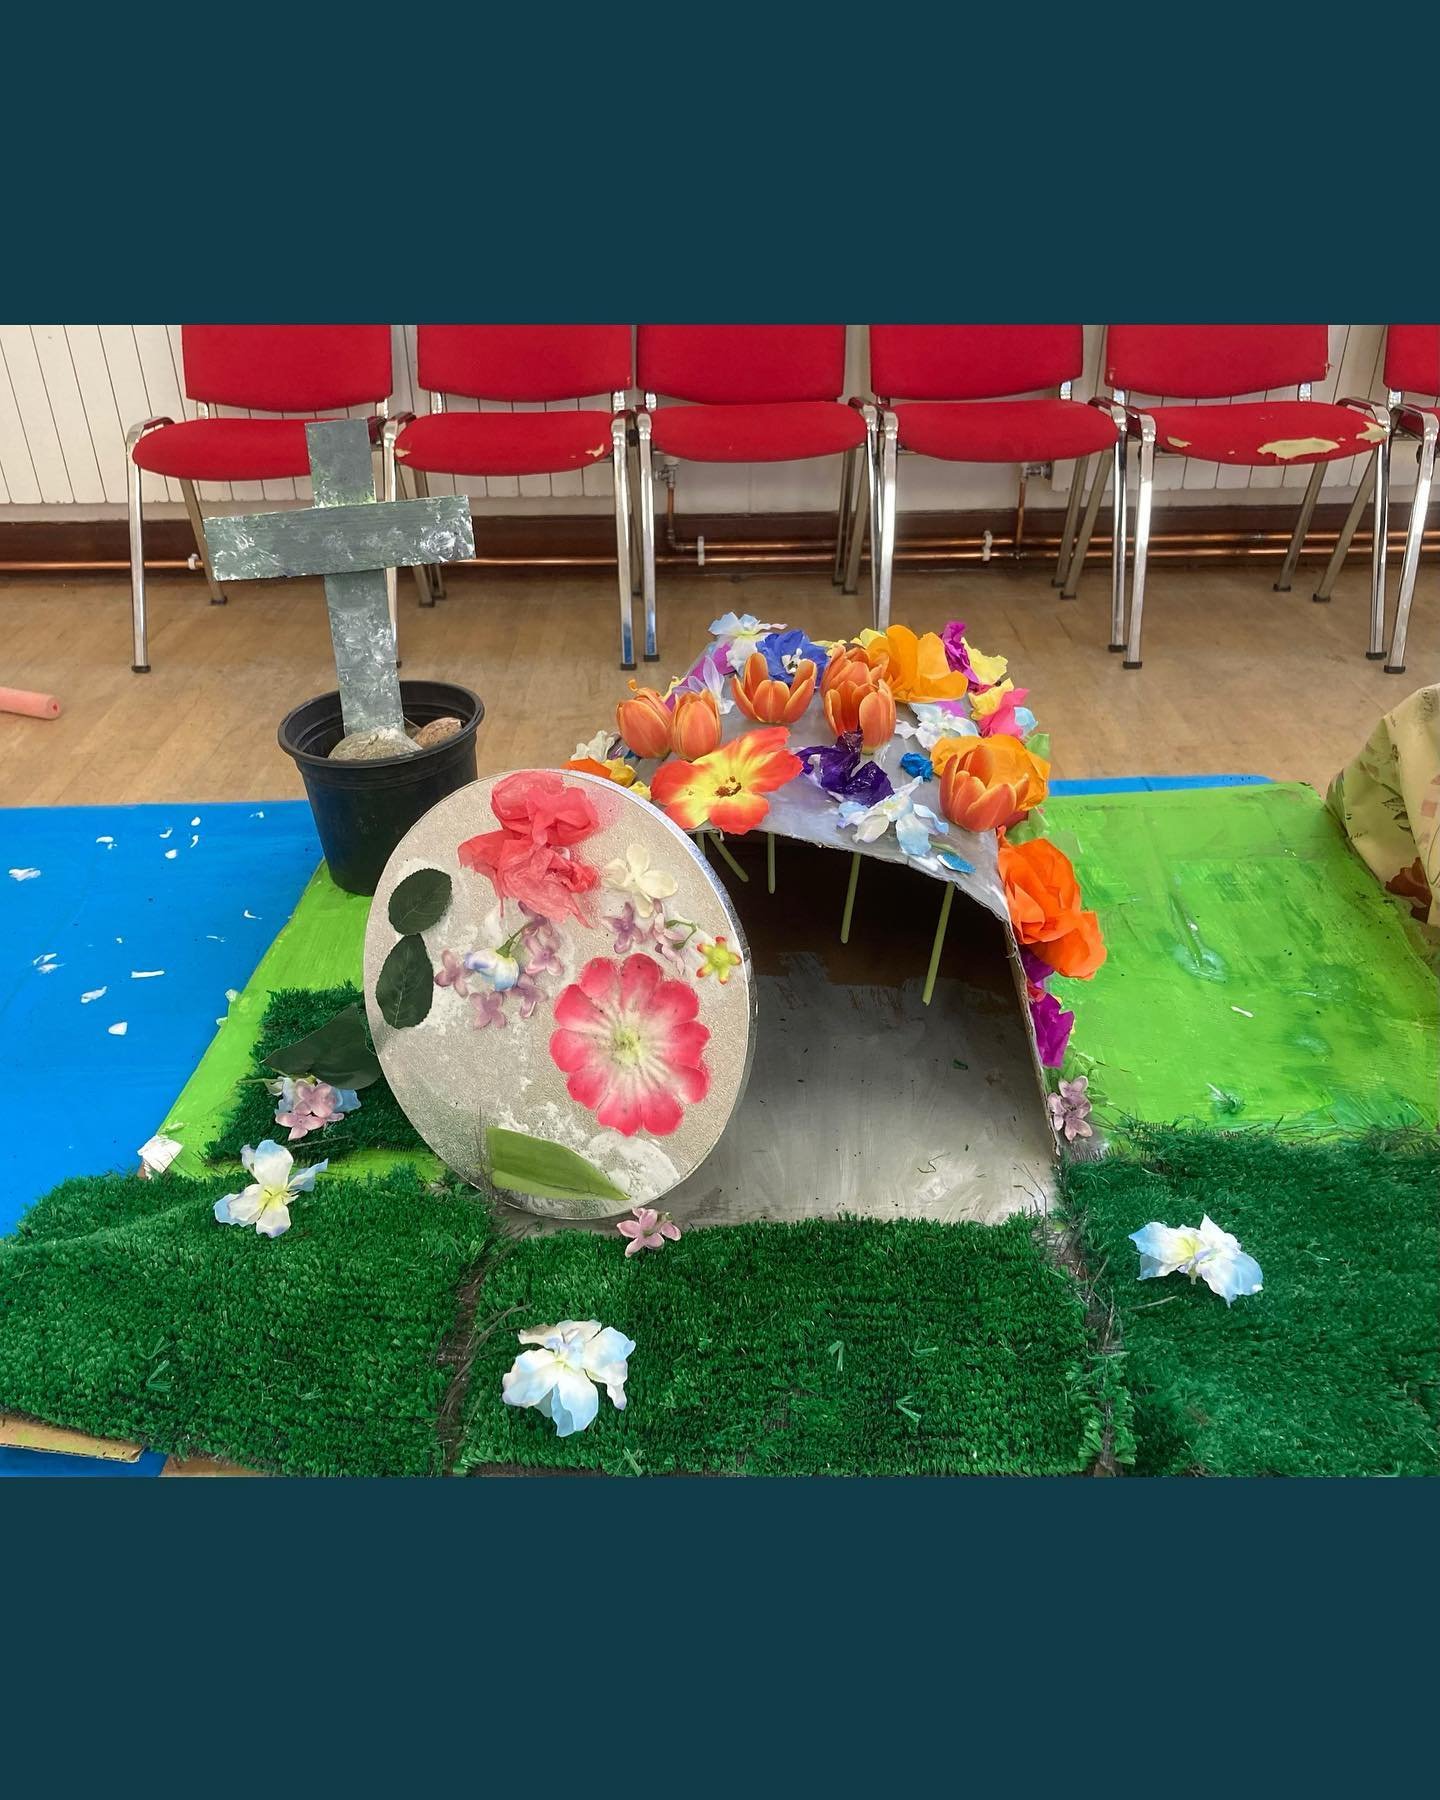 Easter Day
We gathered to celebrate Jesus rising from the dead on Easter Sunday. We thought about how Jesus&rsquo; Resurrection shows us that God has defeated all darkness, sin and death in the world. This is the foundation of our current faith and f